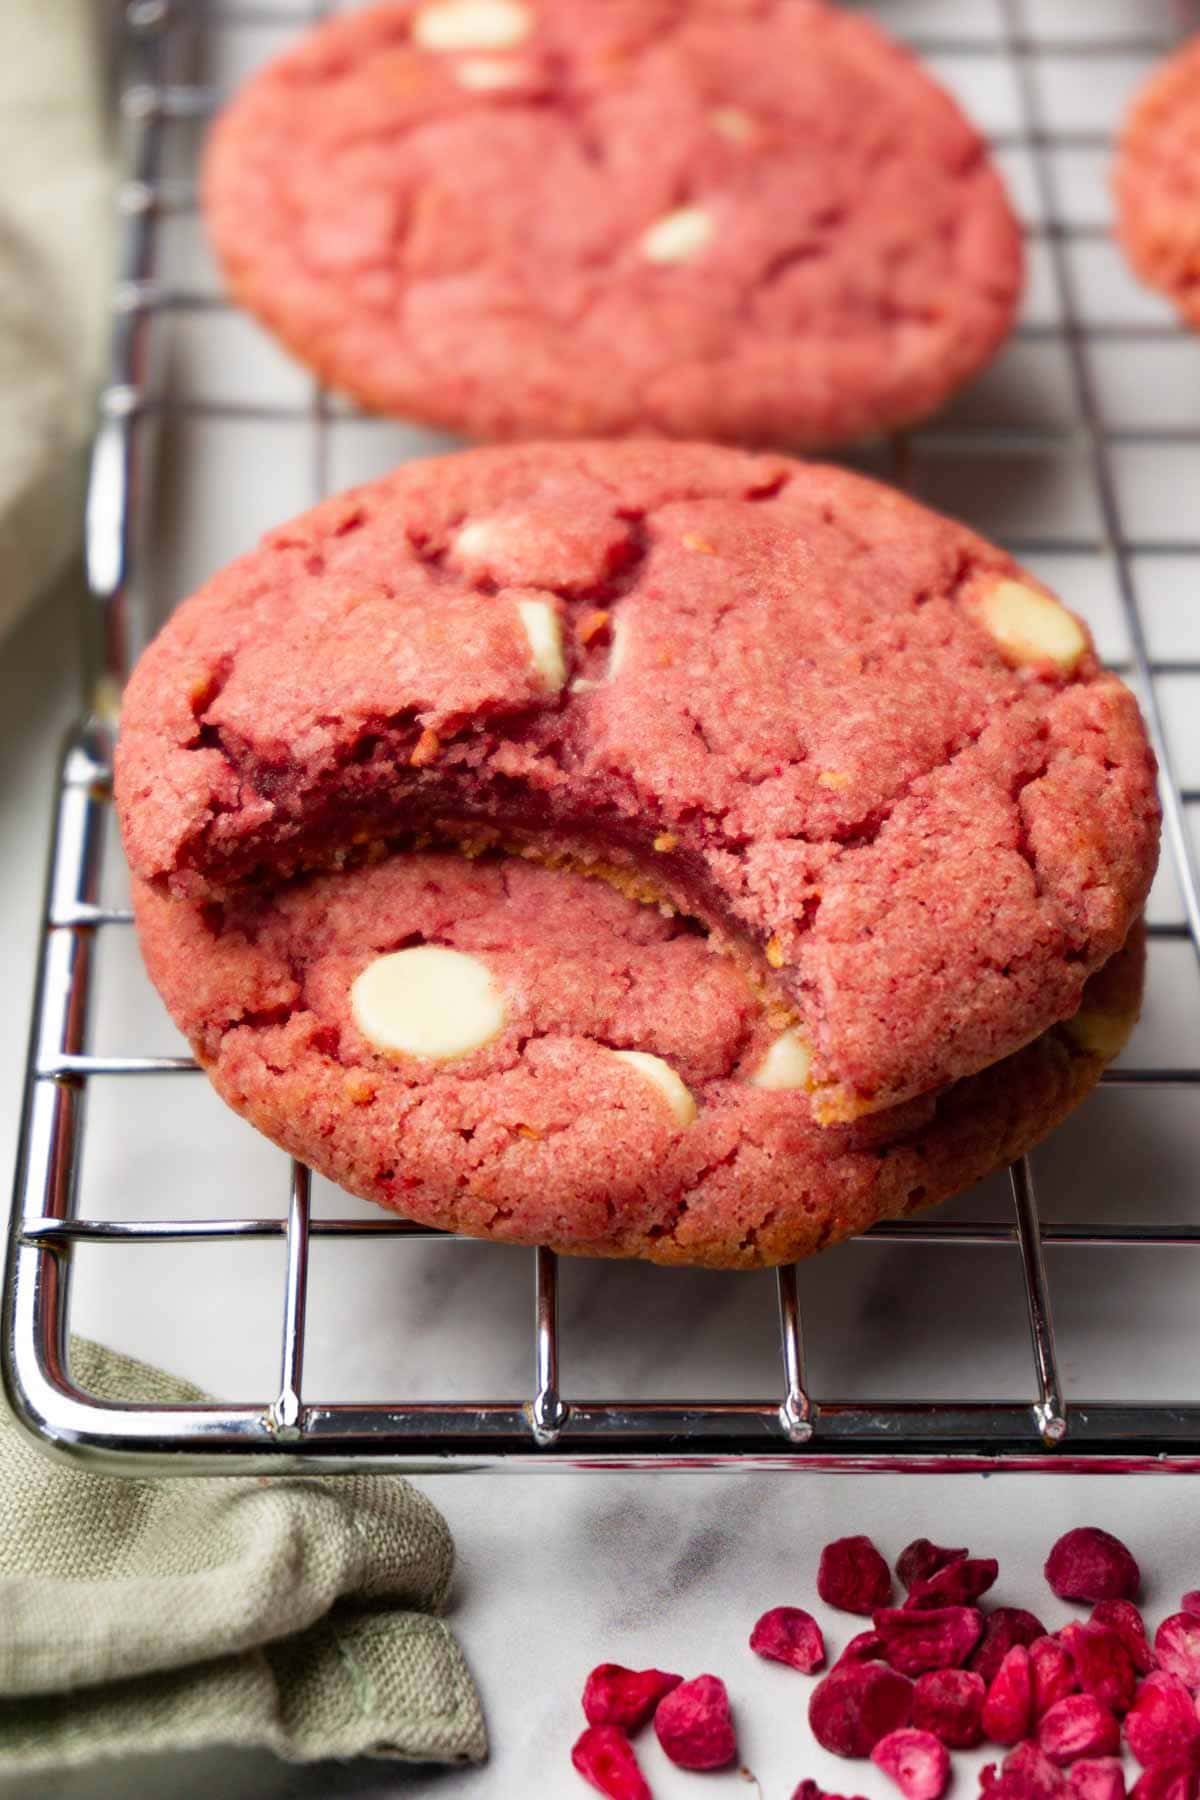 Raspberry cookies with white chocolate chips are stacked on top of each other; one bite was taken from the top cookie.